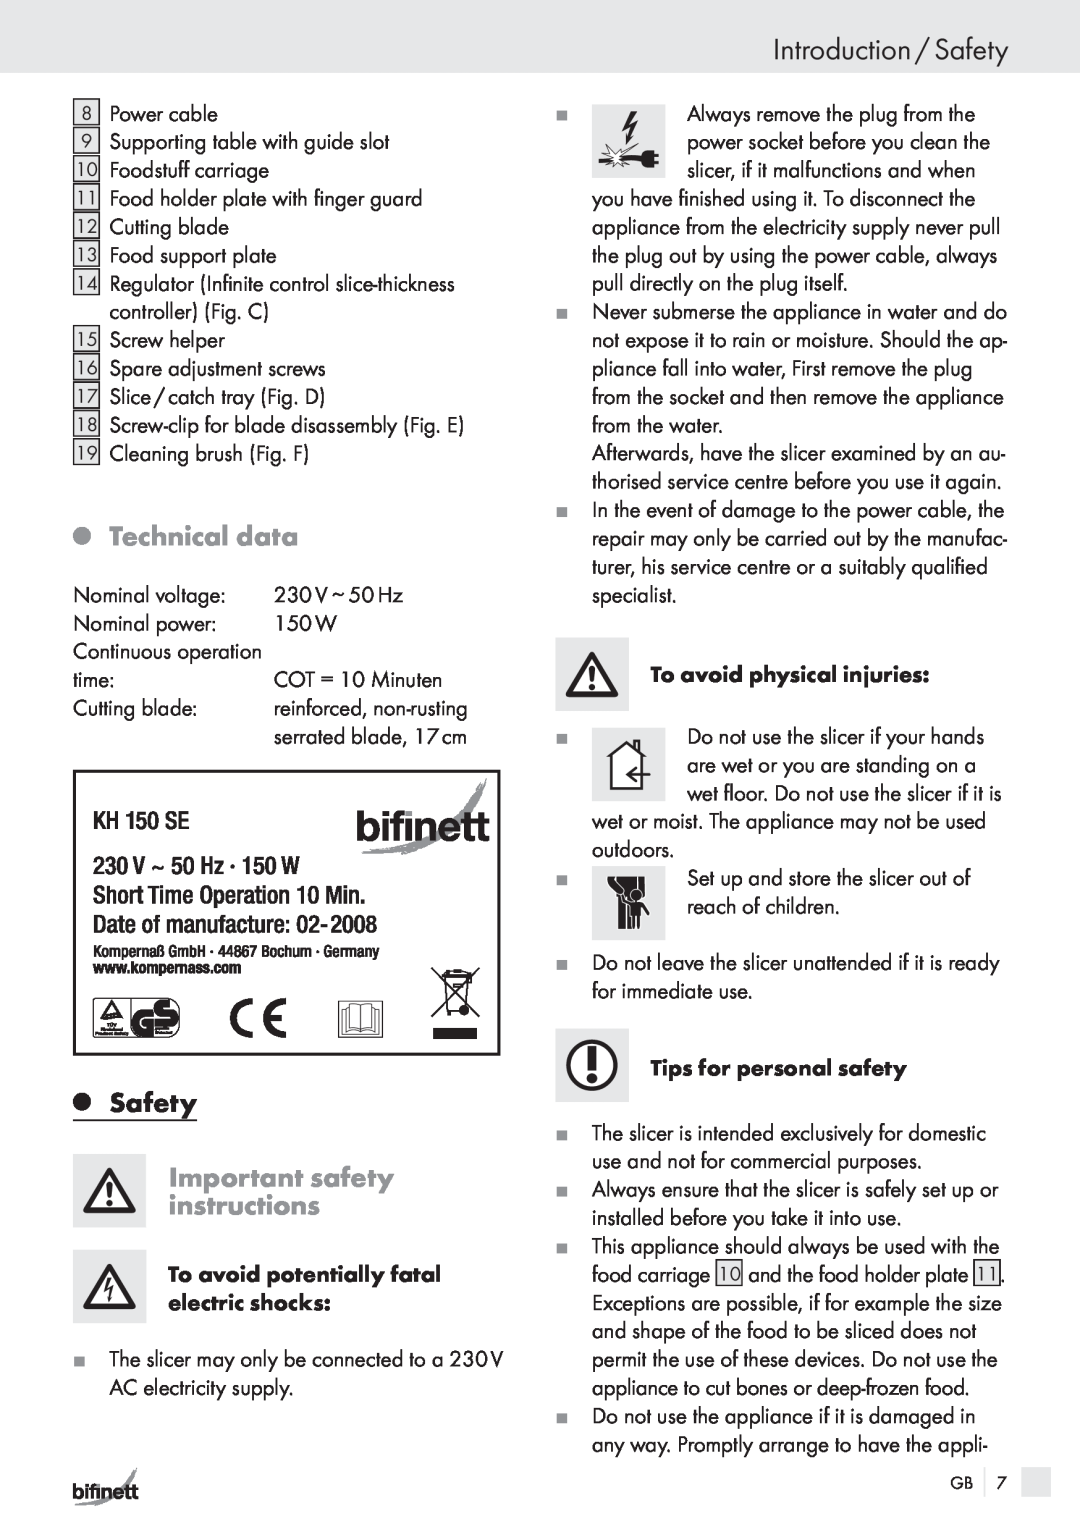 Bifinett KH 150 manual Introduction / Safety, QTechnical data, QSafety, Important safety instructions 